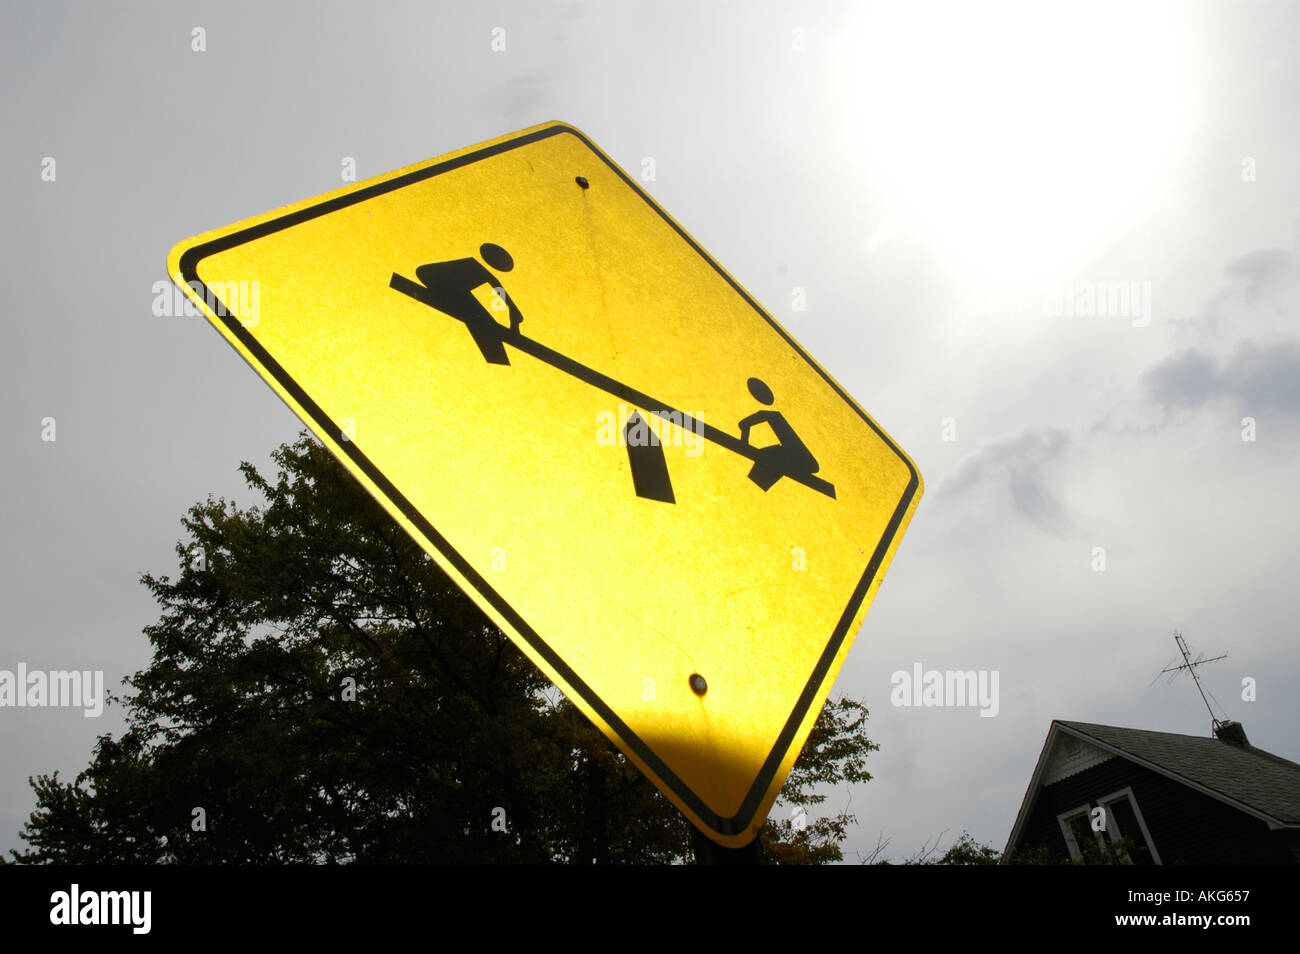 Teeter totter Children sign at Kids Playground in public park Stock Photo